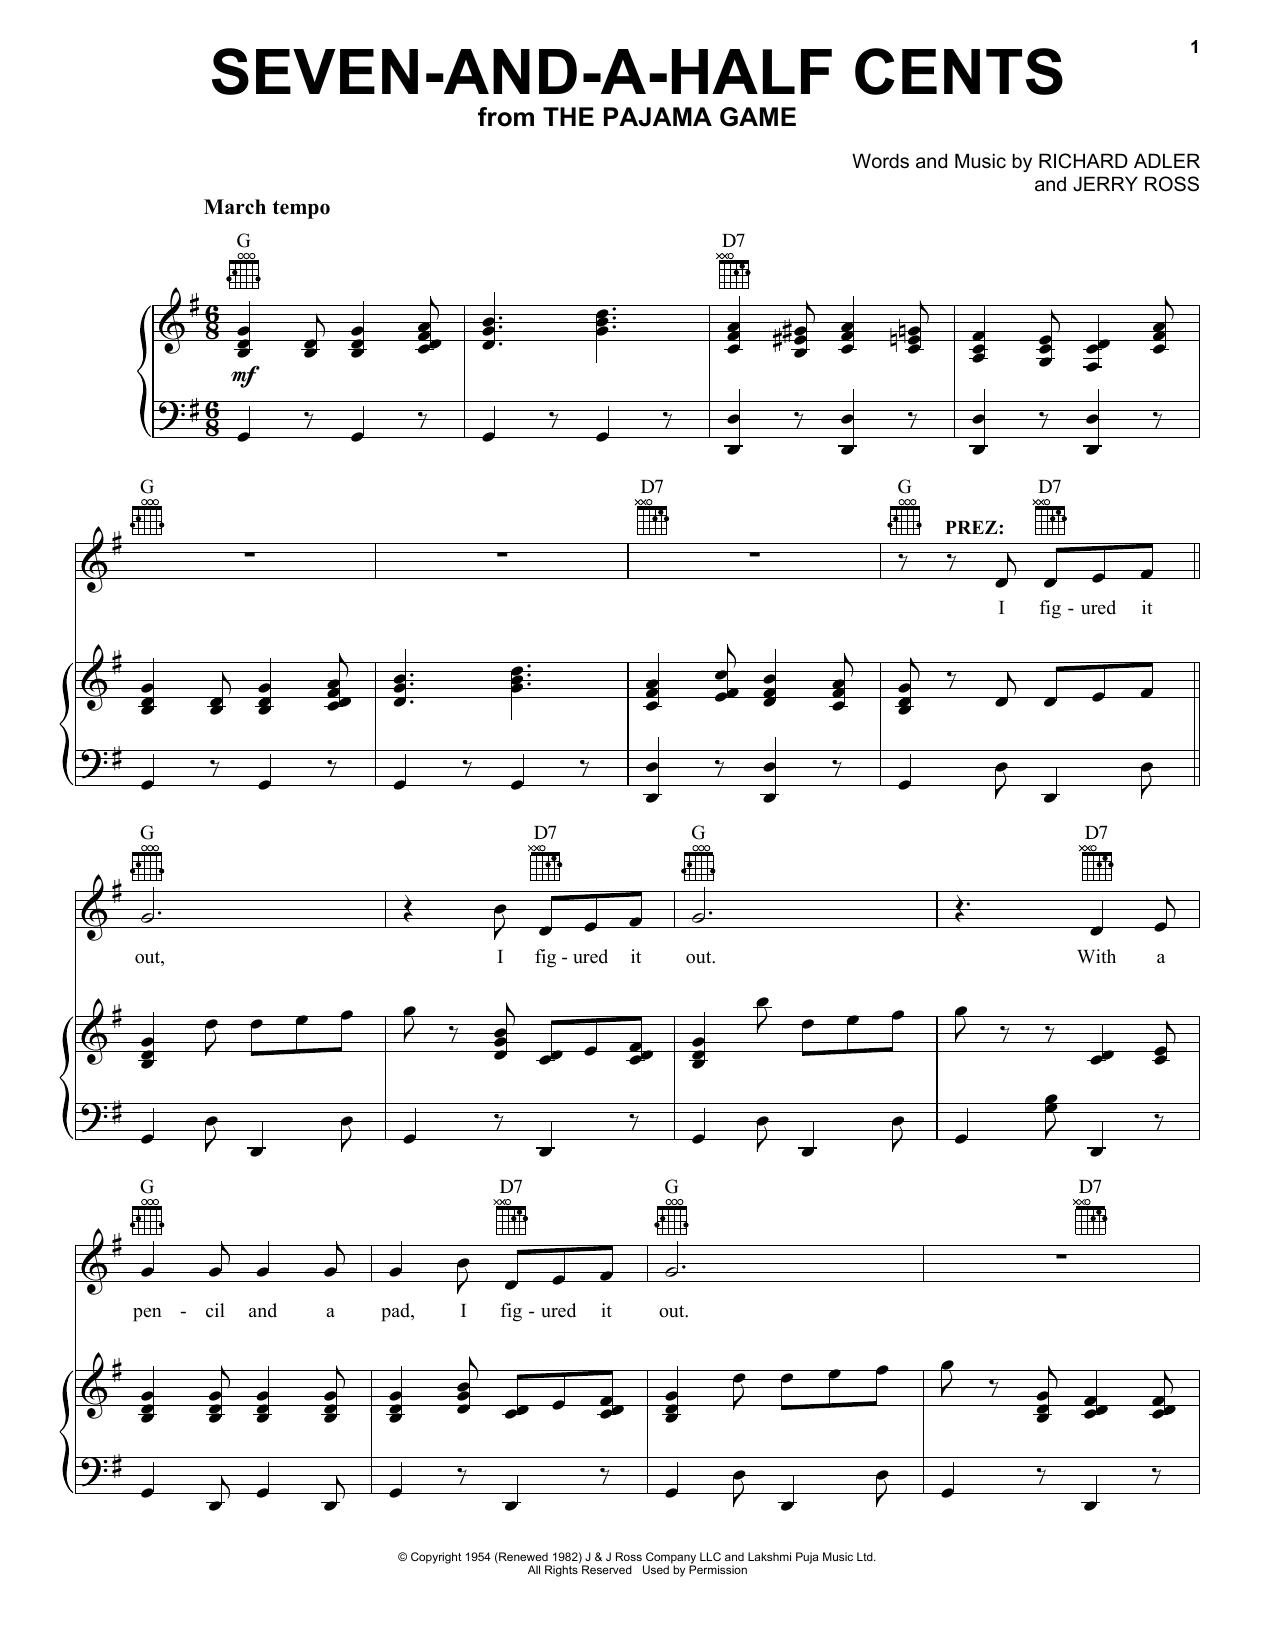 Download Adler & Ross Seven-And-A-Half Cents Sheet Music